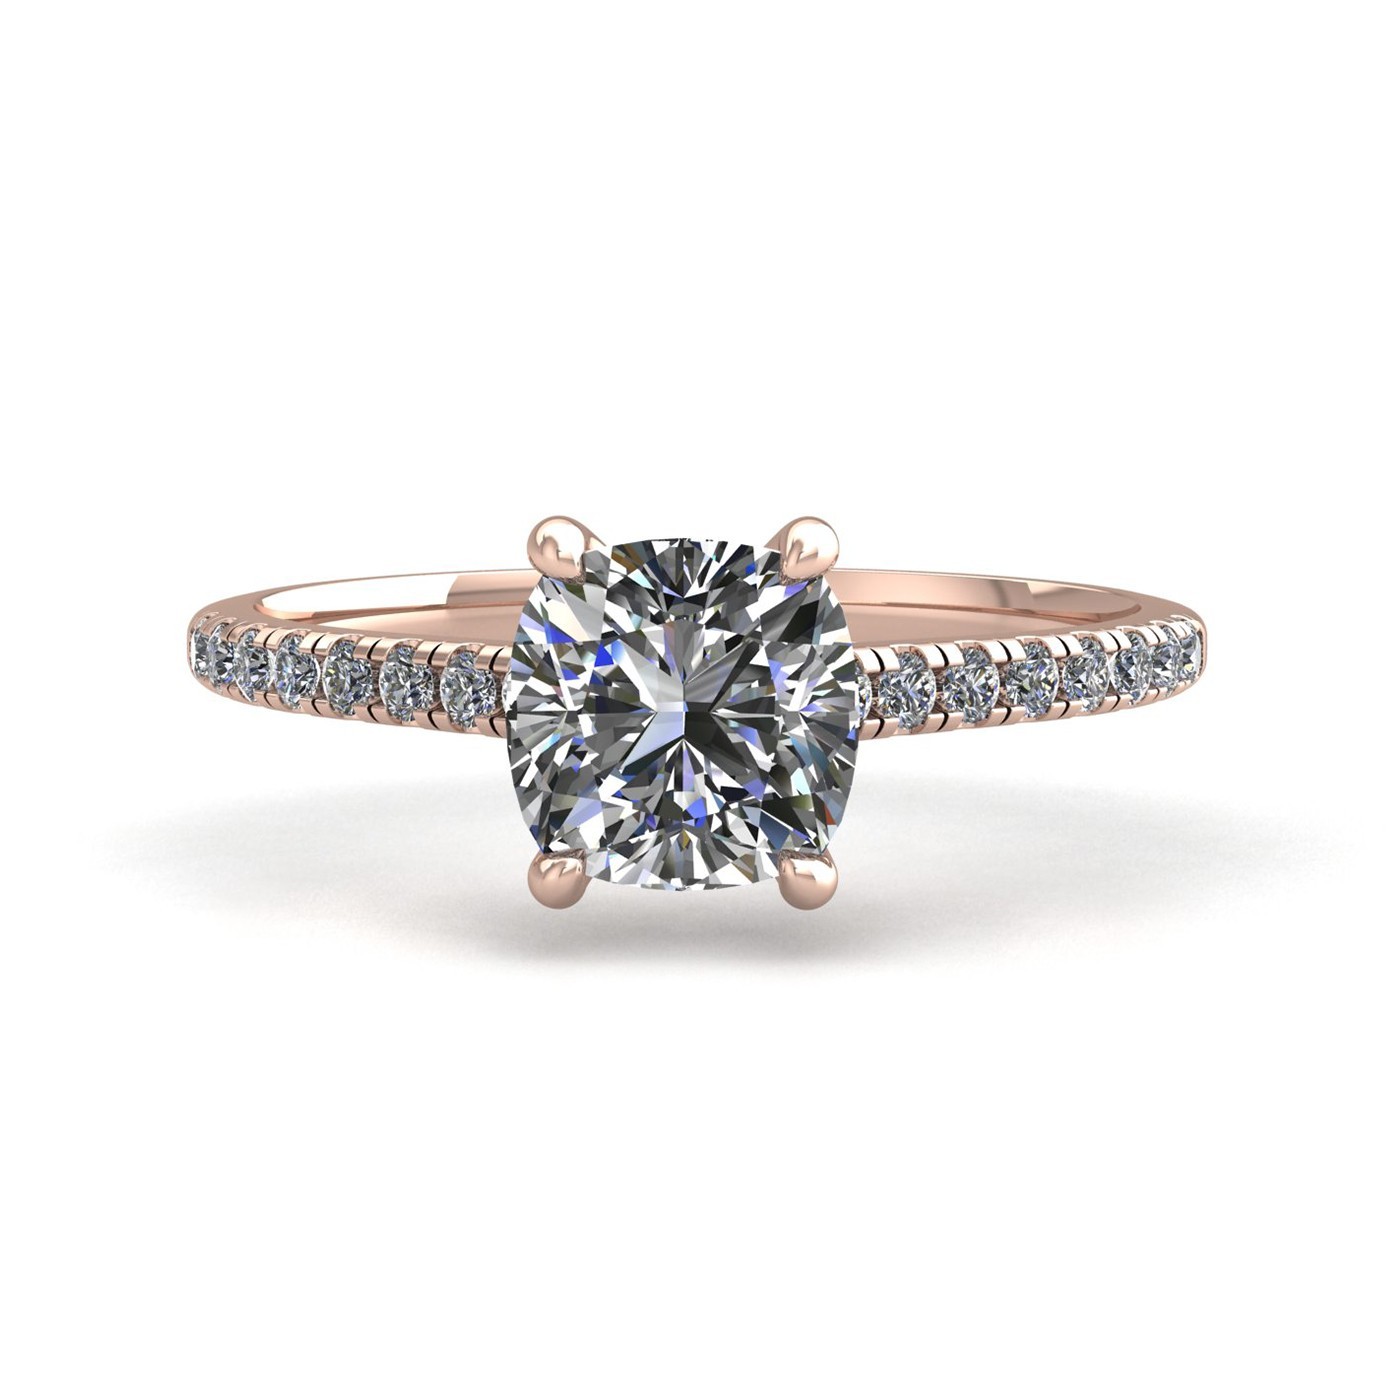 18k rose gold  0,30 ct 4 prongs cushion cut diamond engagement ring with whisper thin pavÉ set band Photos & images